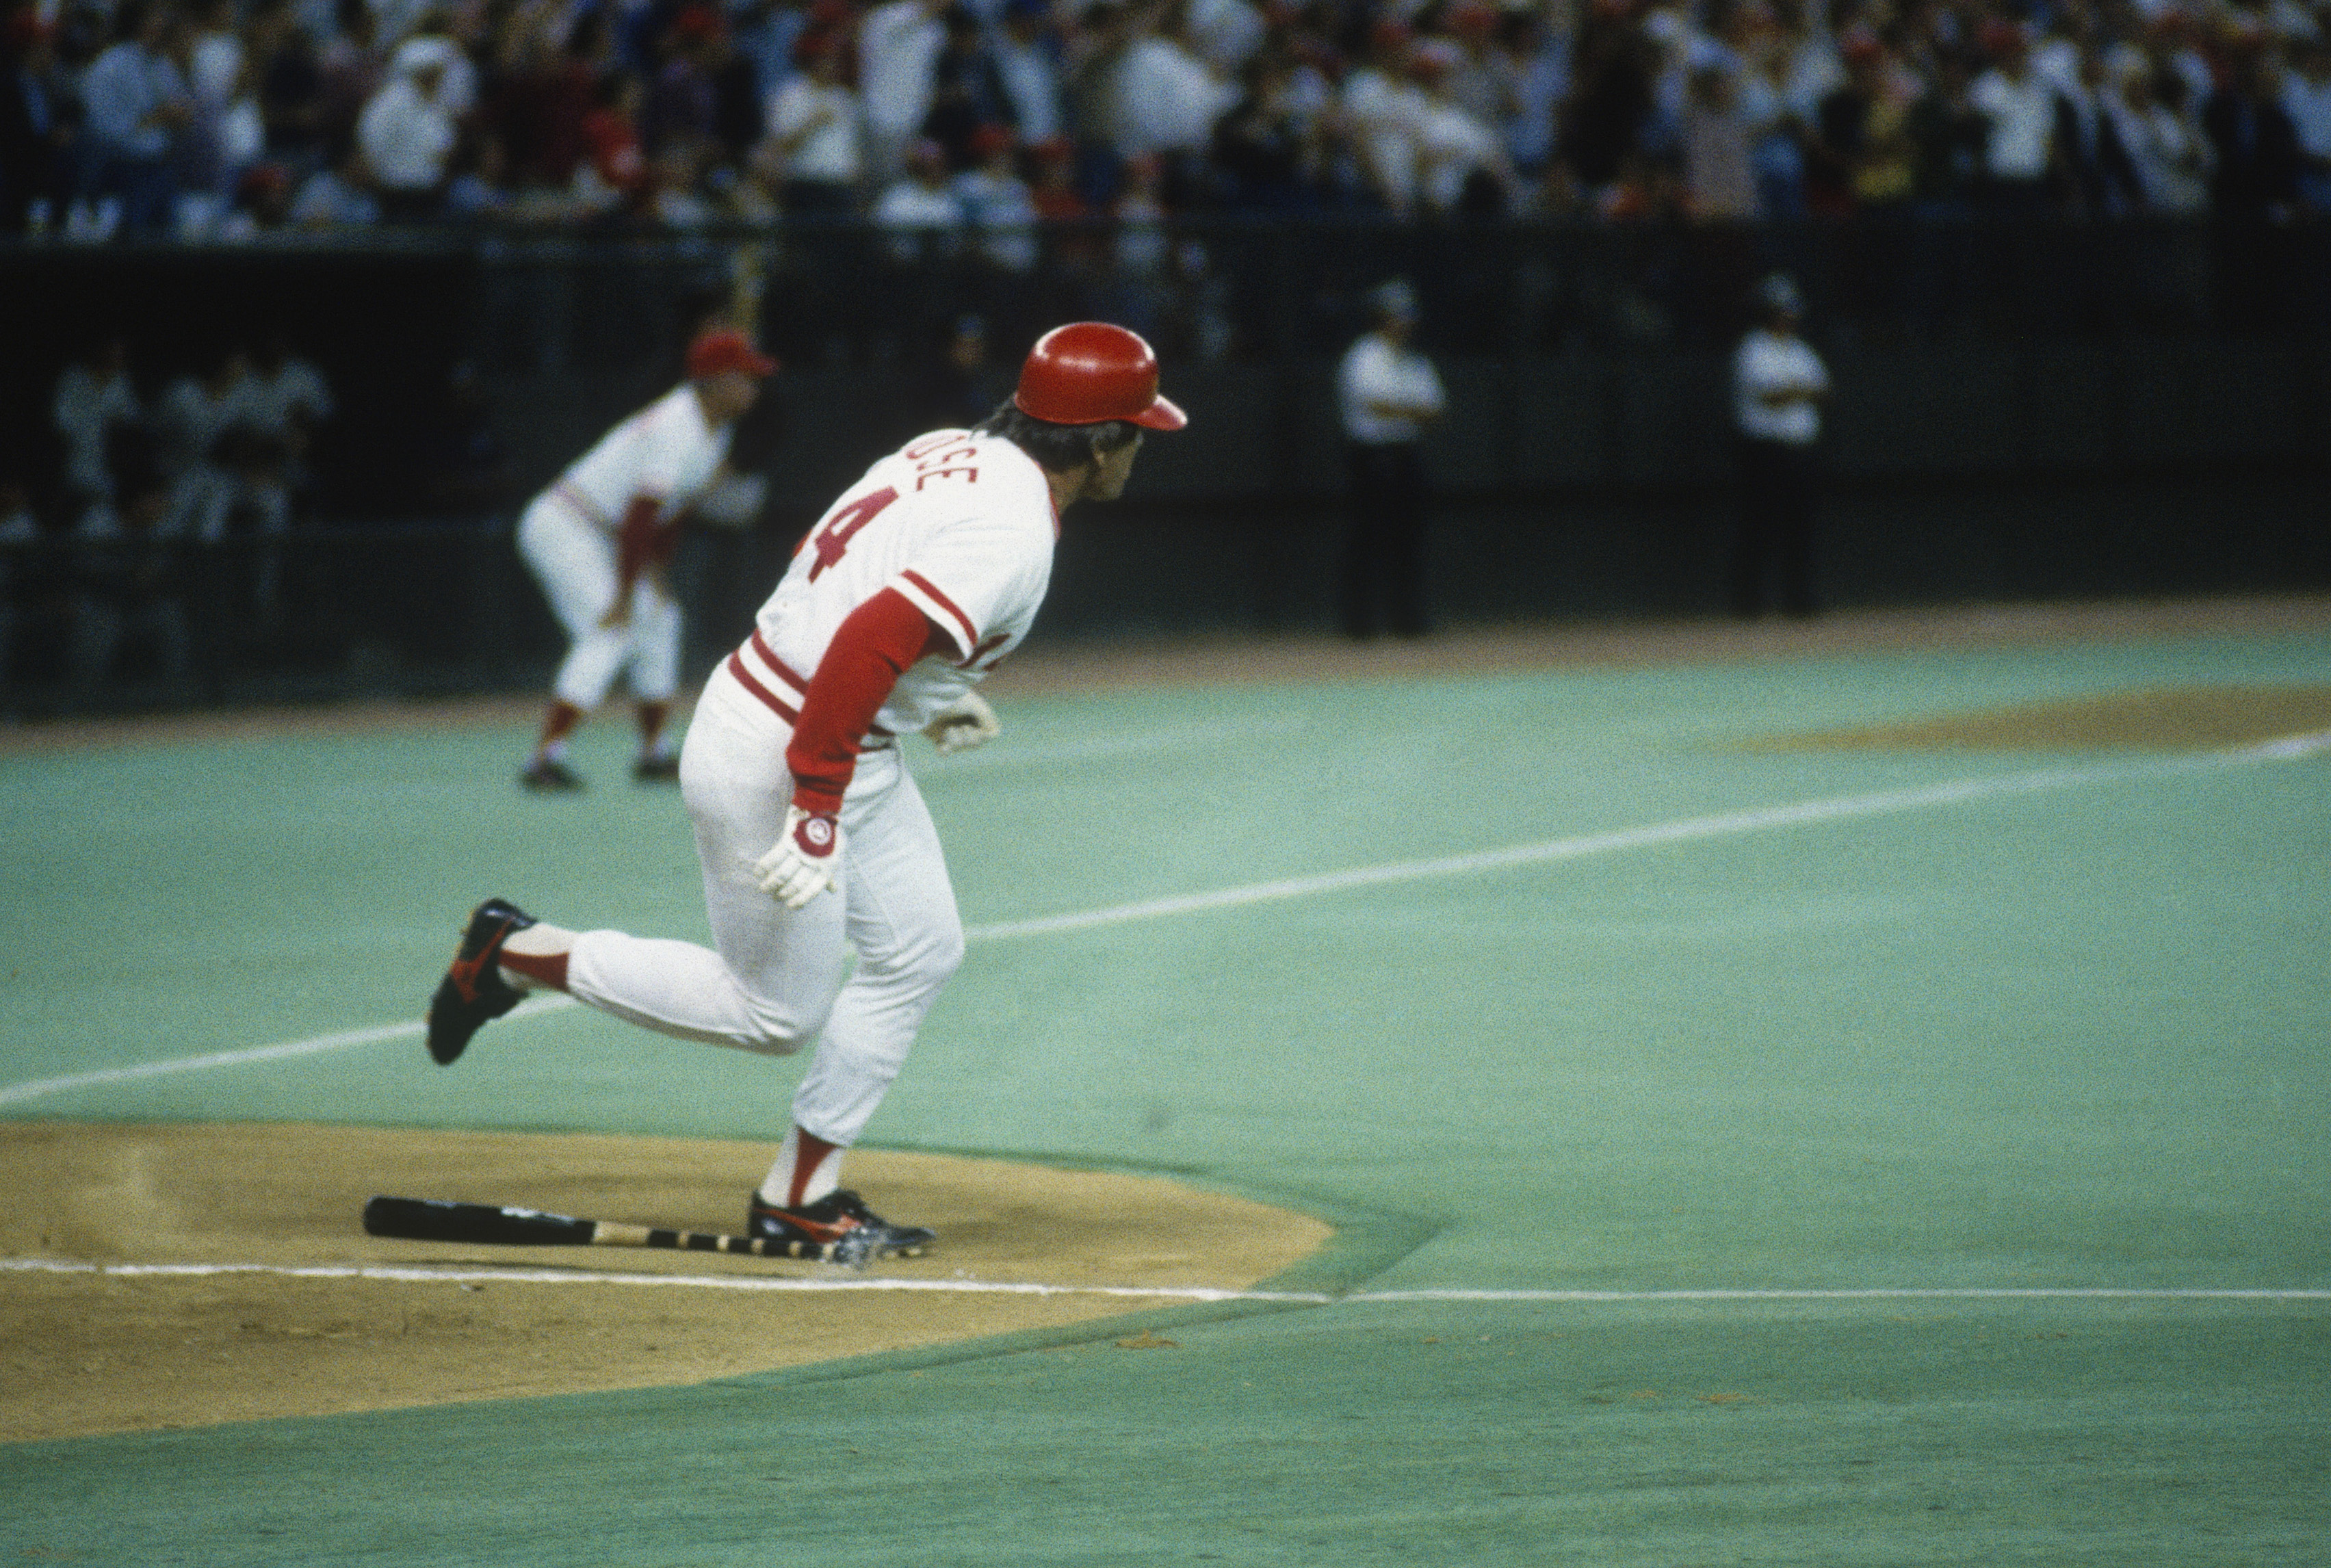 Pete Rose collects his 4,192nd hit.